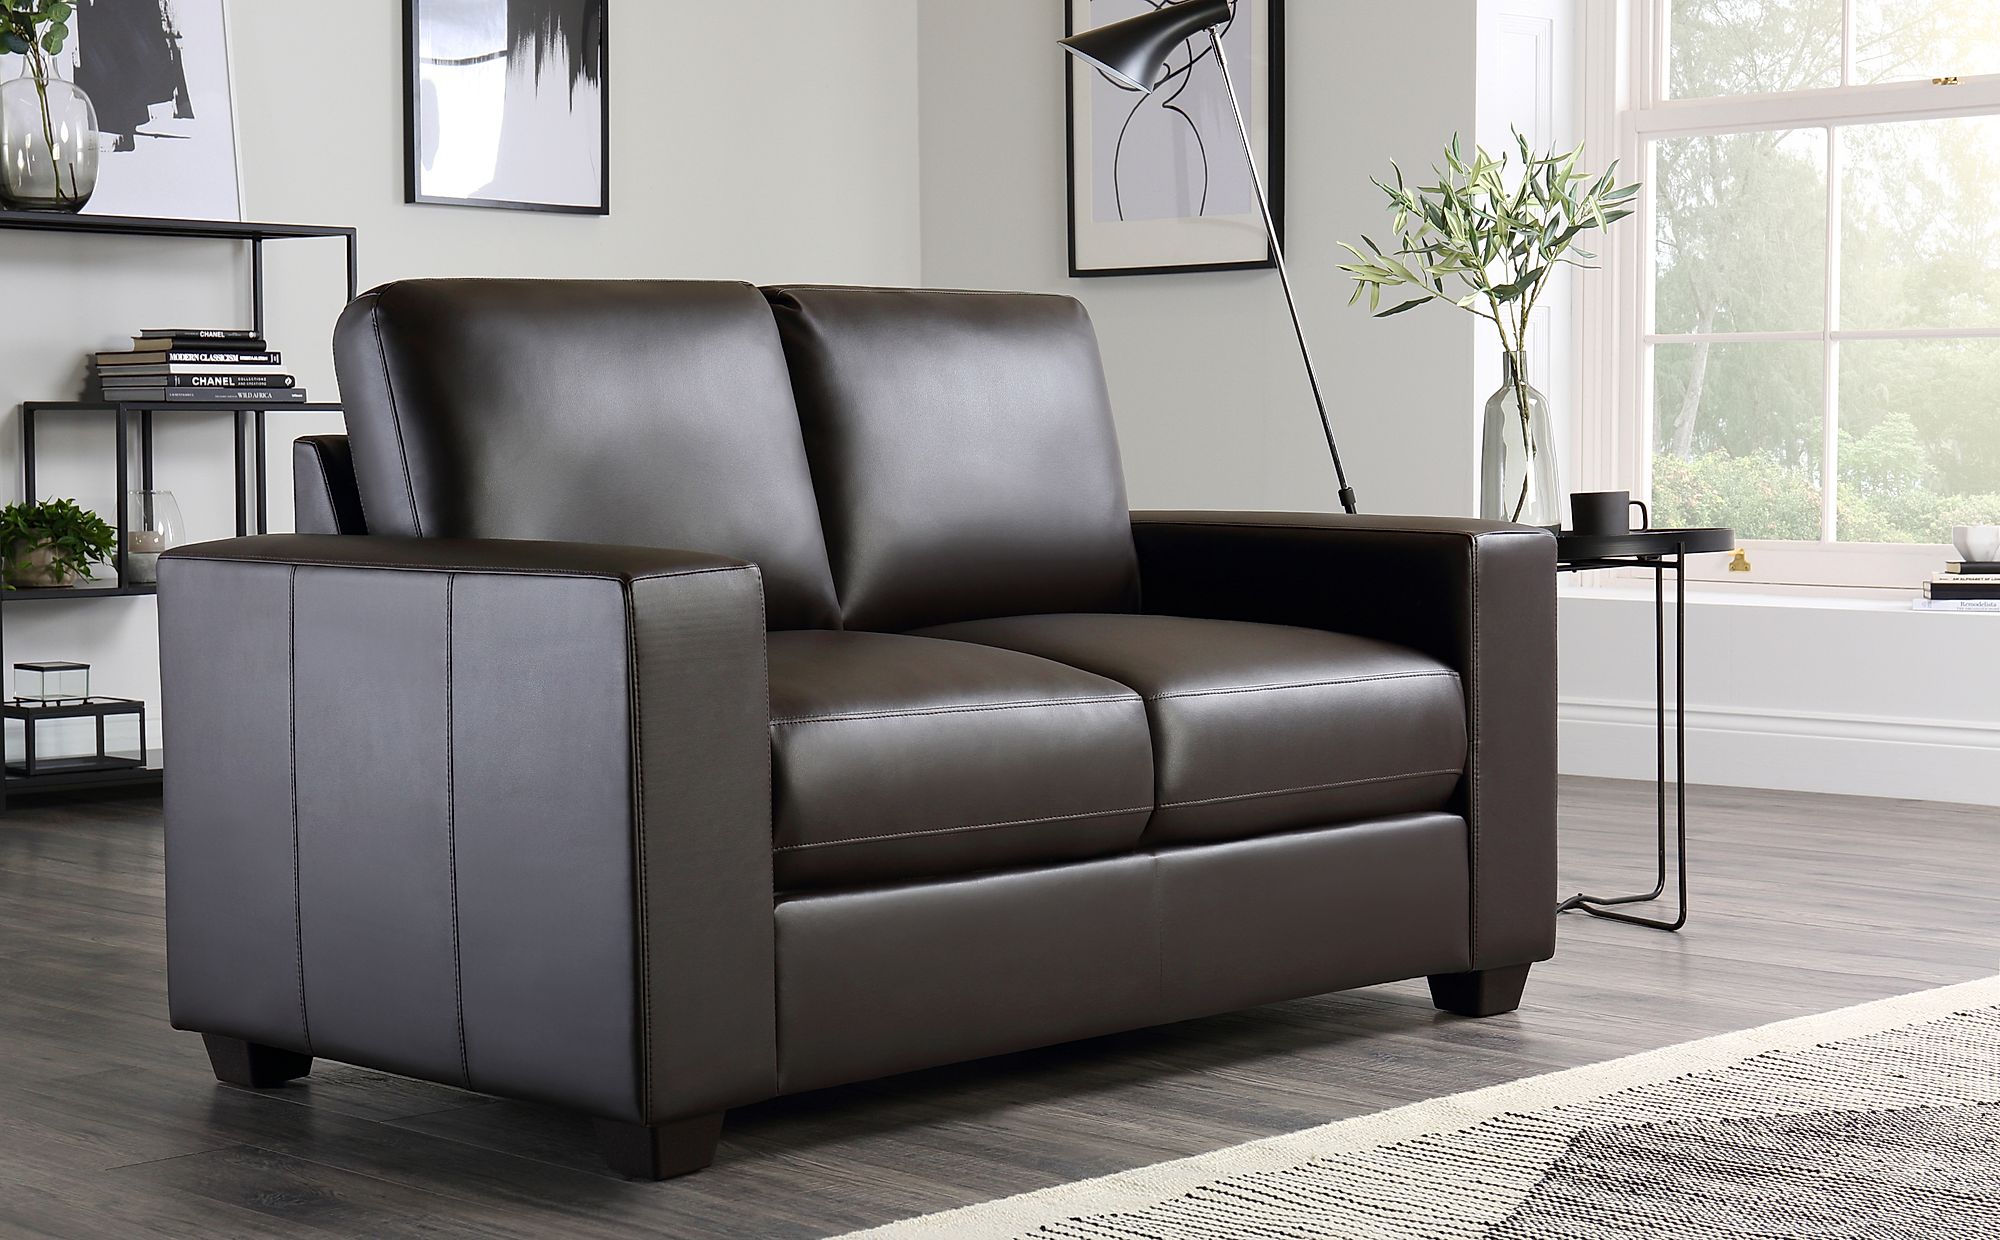 2 seater brown leather sofa